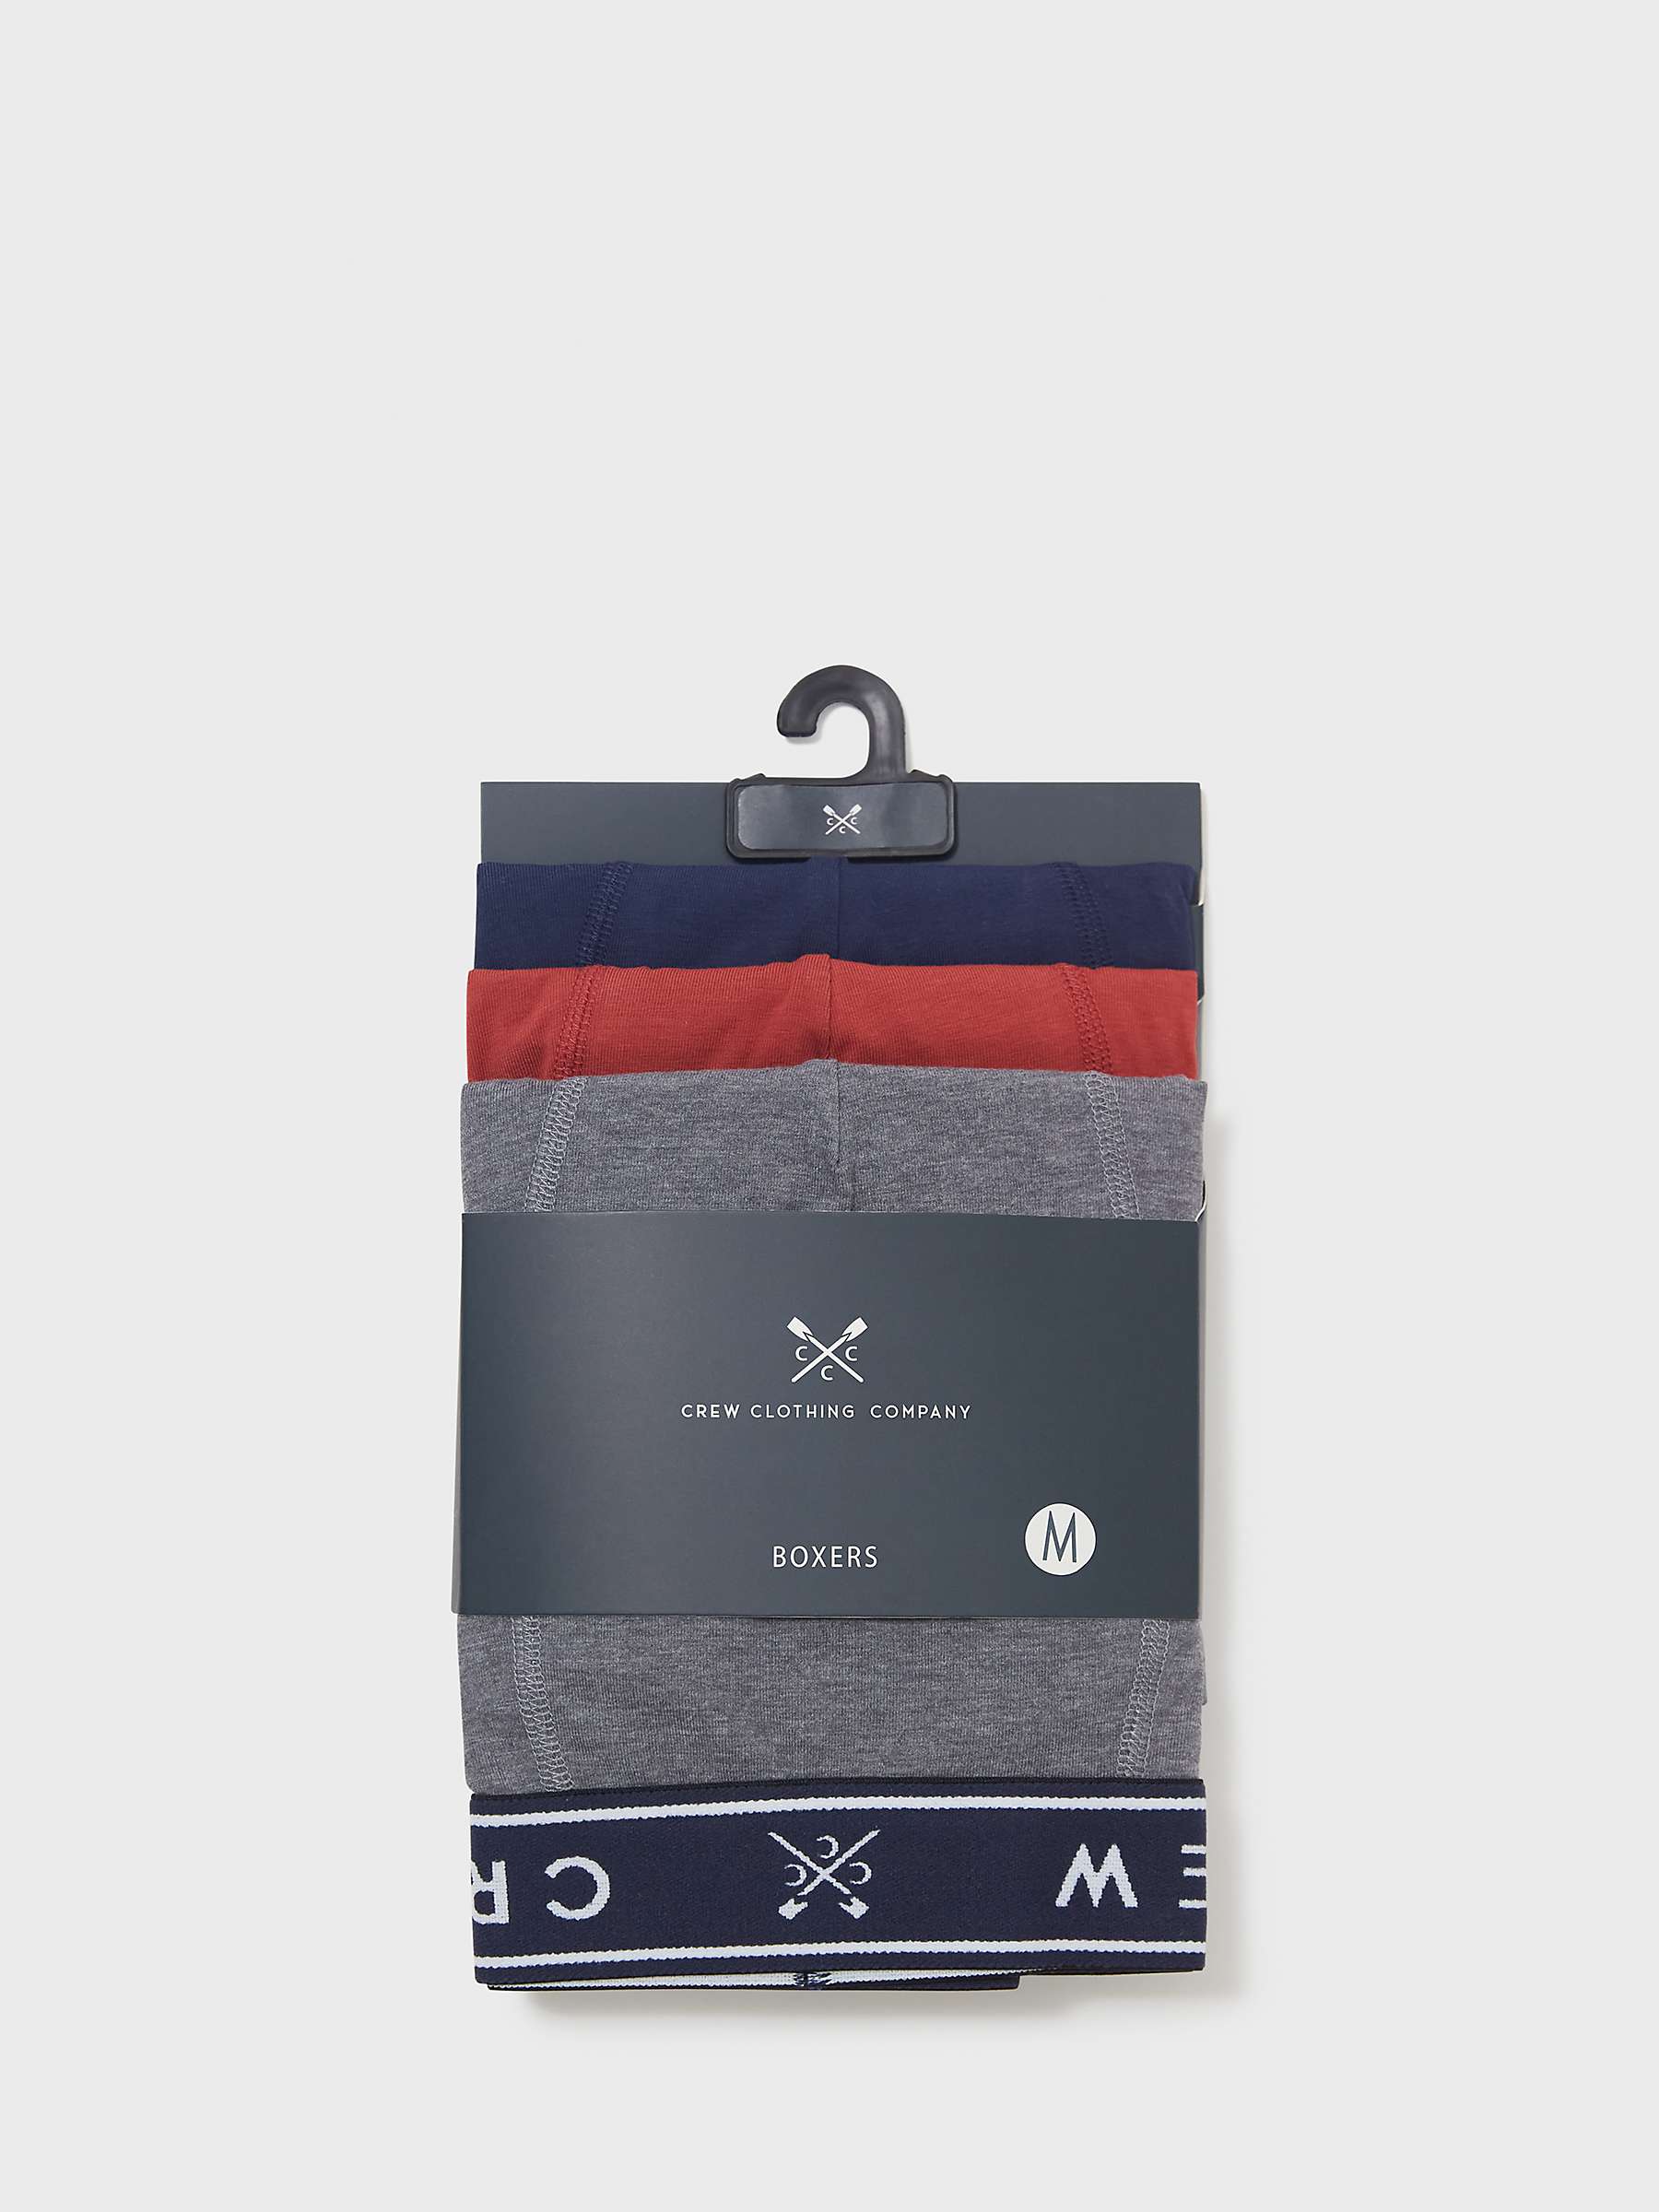 Buy Crew Clothing Jersey Boxers, Pack of 3 Online at johnlewis.com